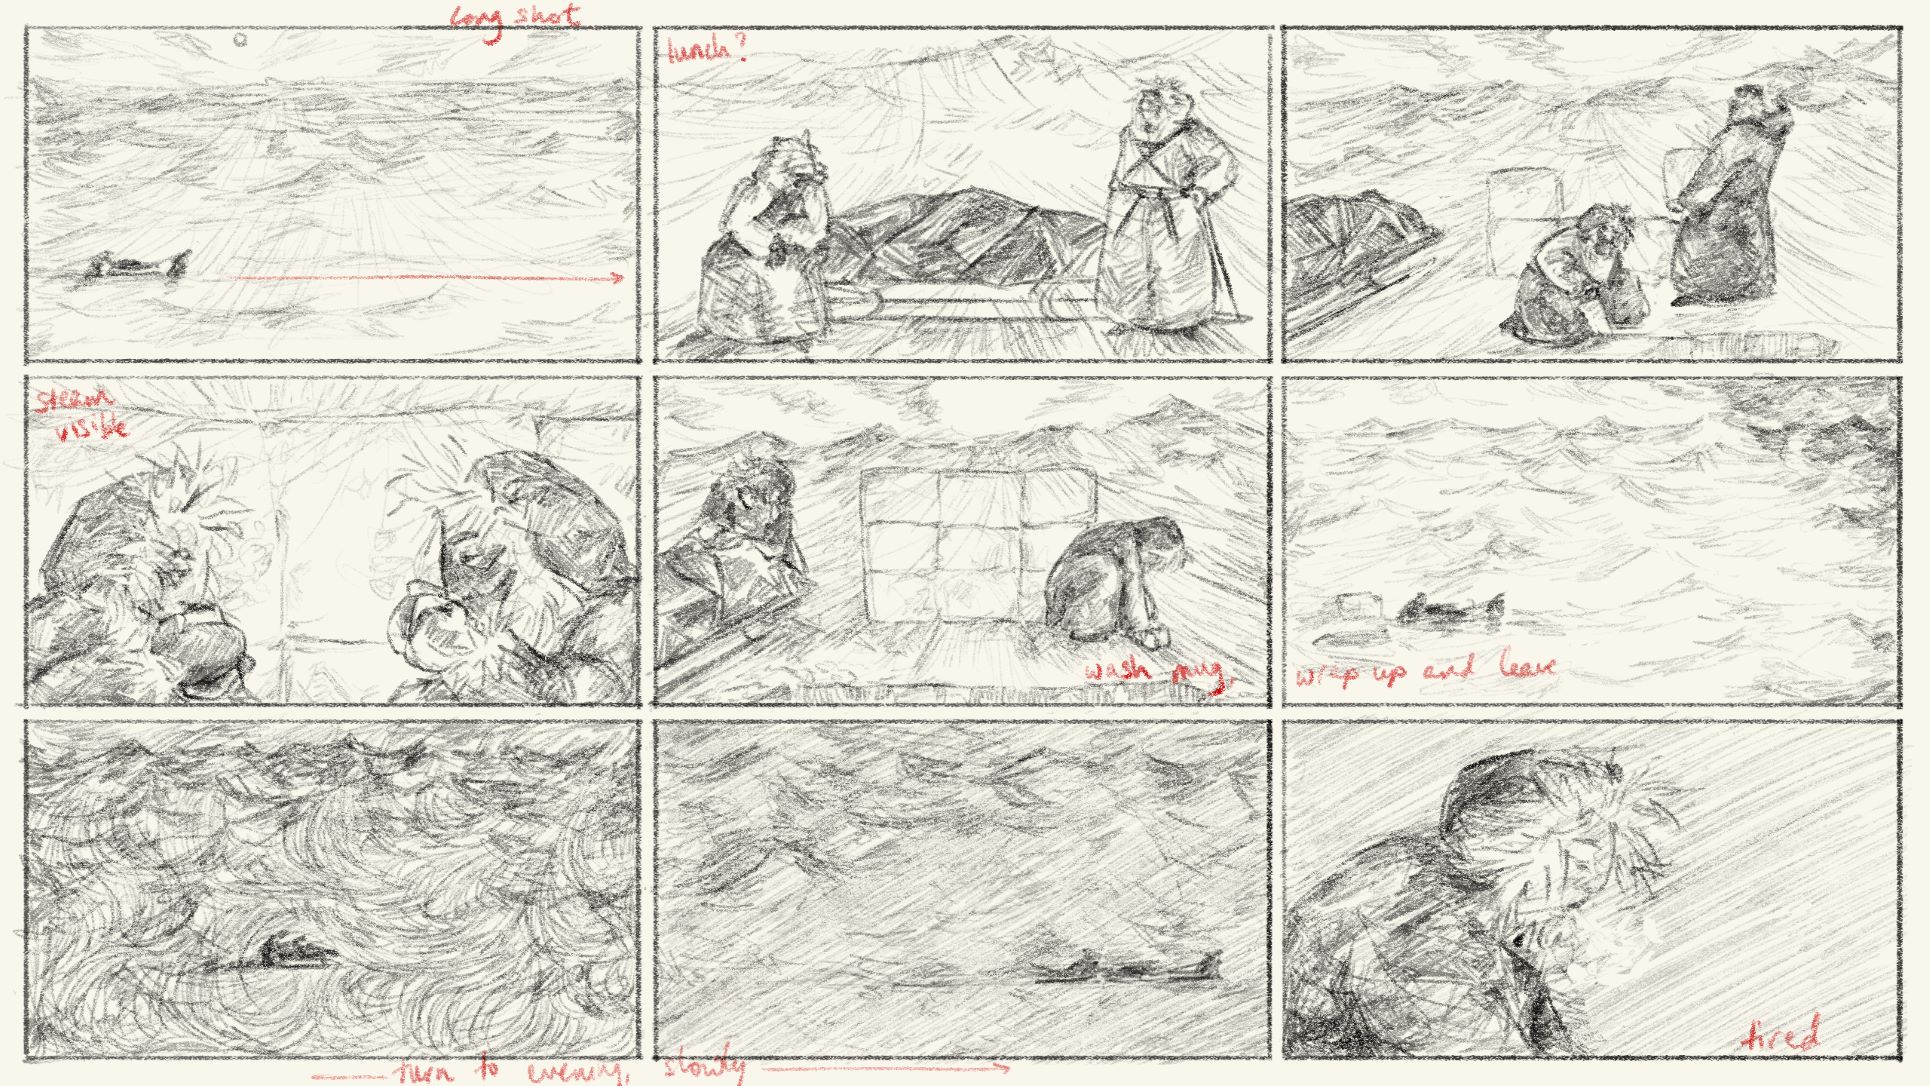 Story Sequence Sketch